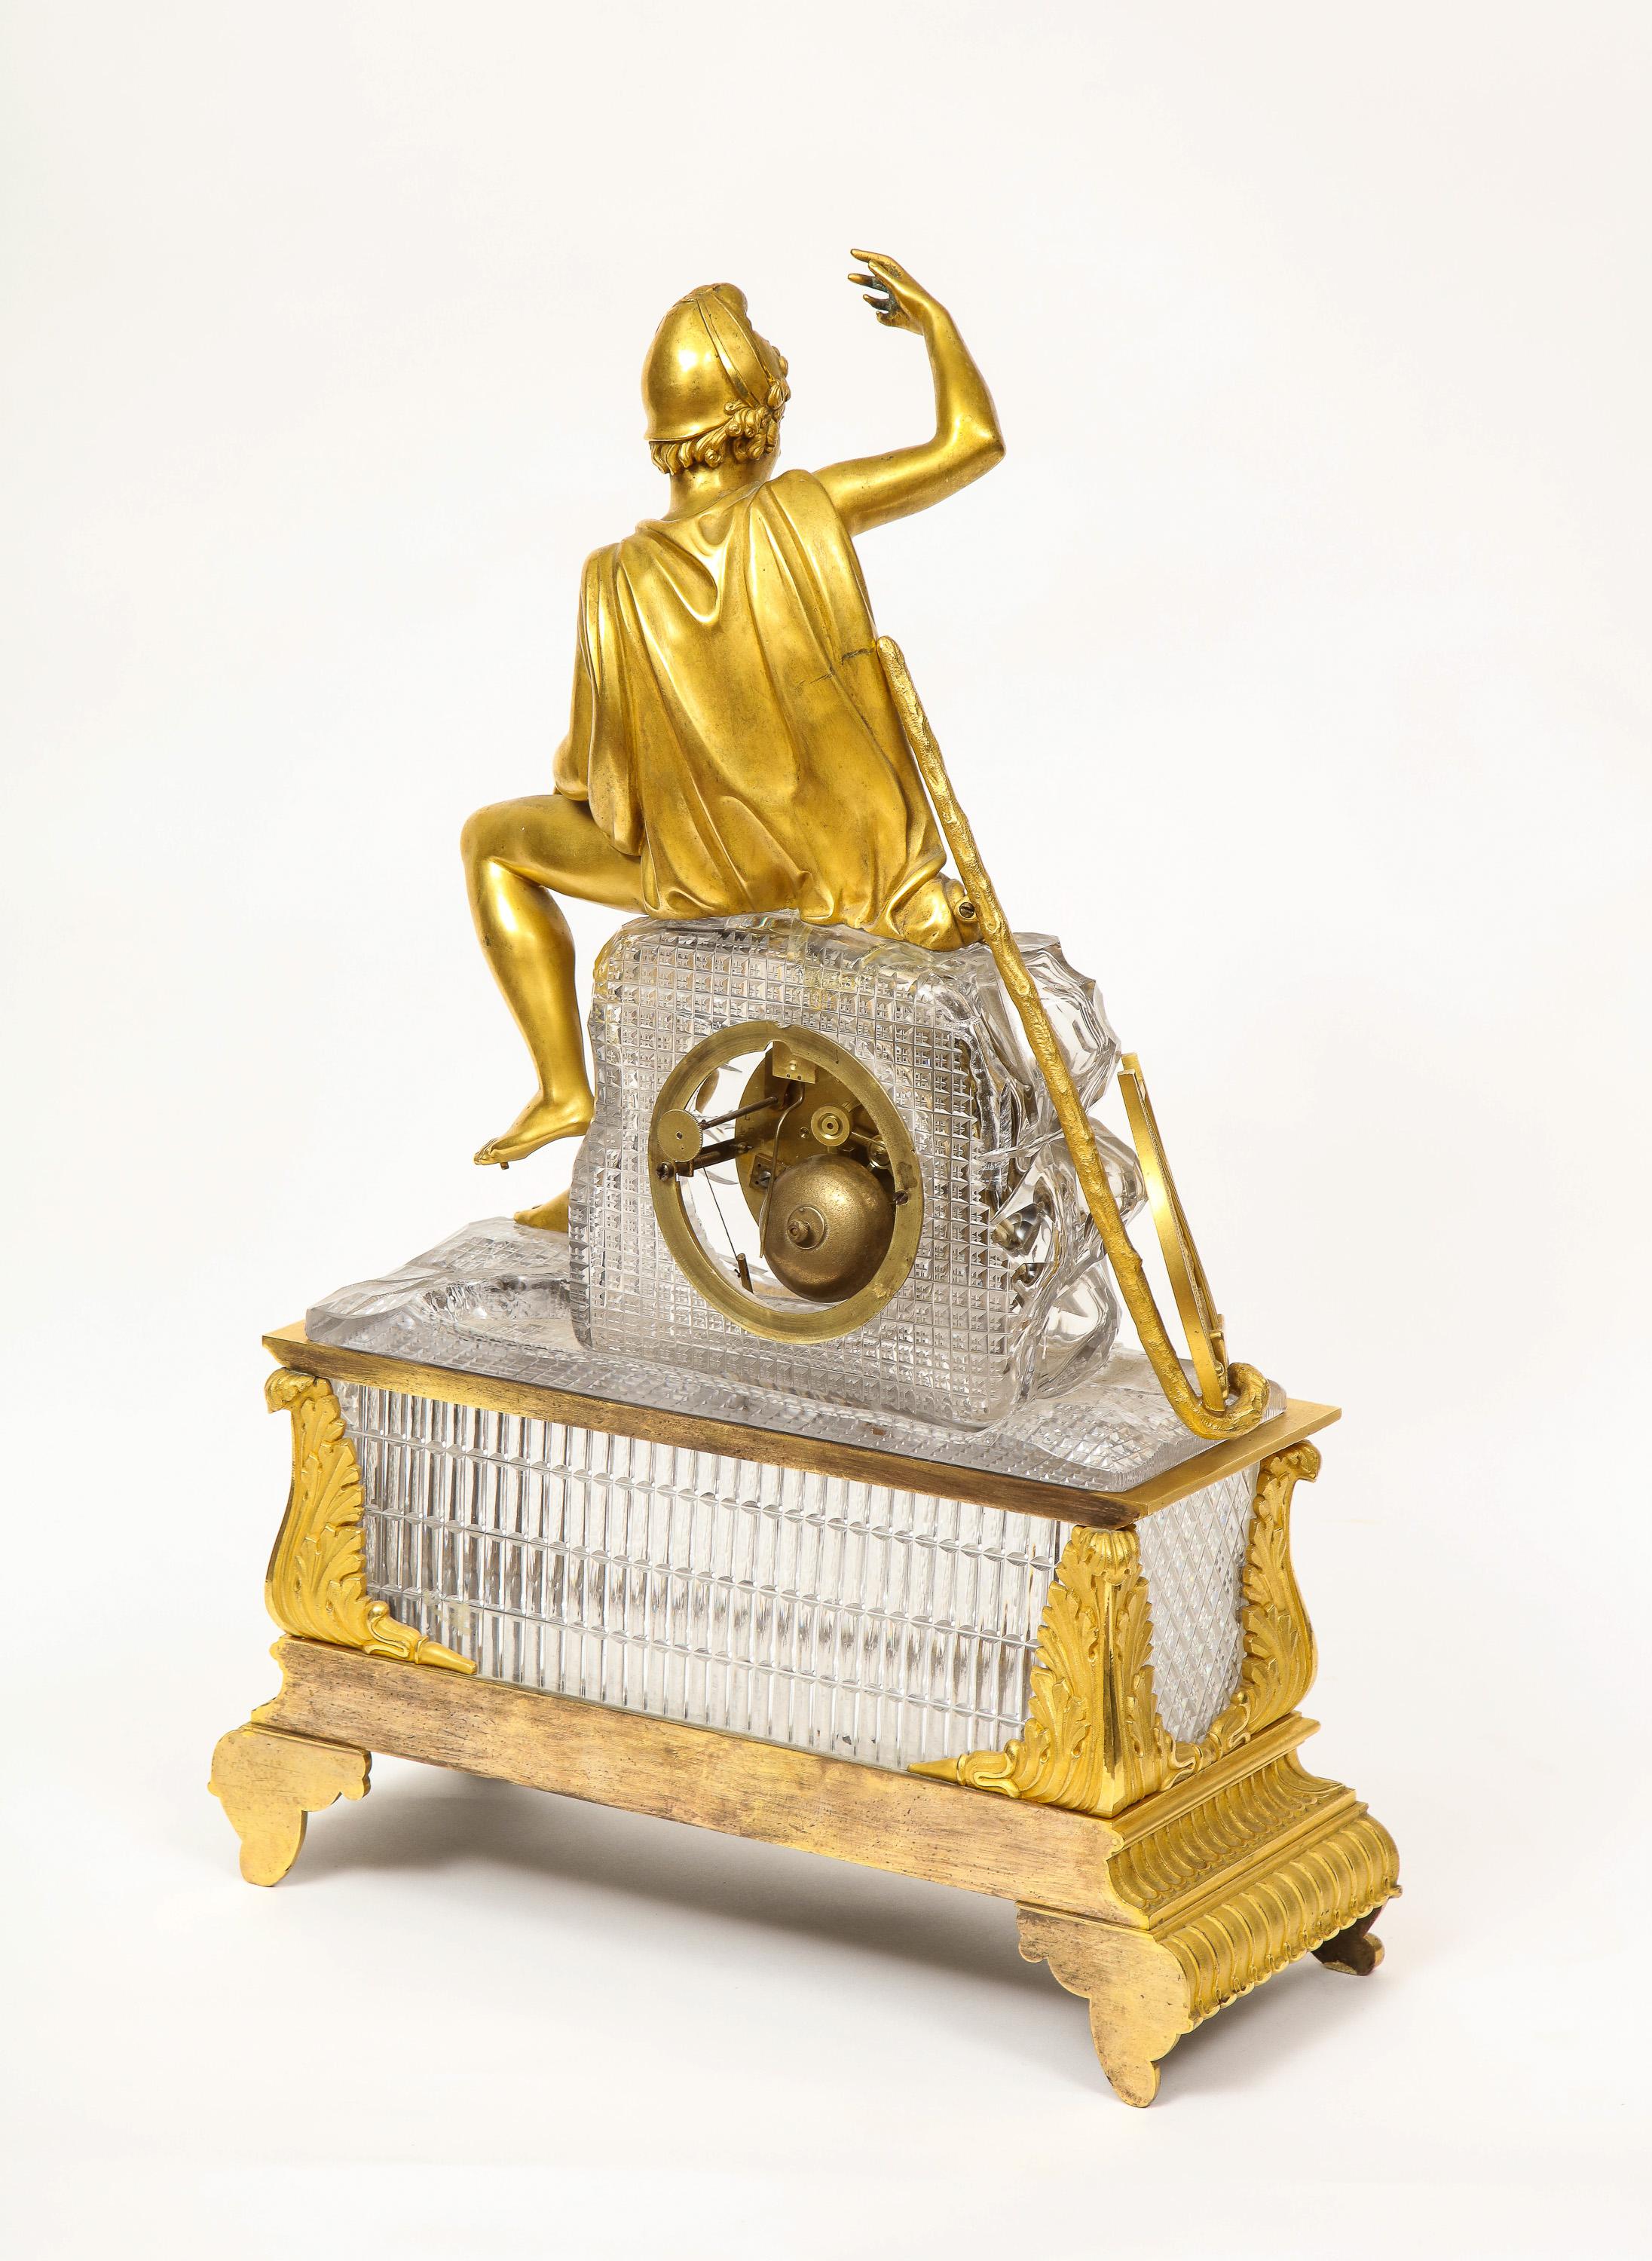 Exquisite French Empire Ormolu and Cut-Crystal Clock, c. 1815 For Sale 6